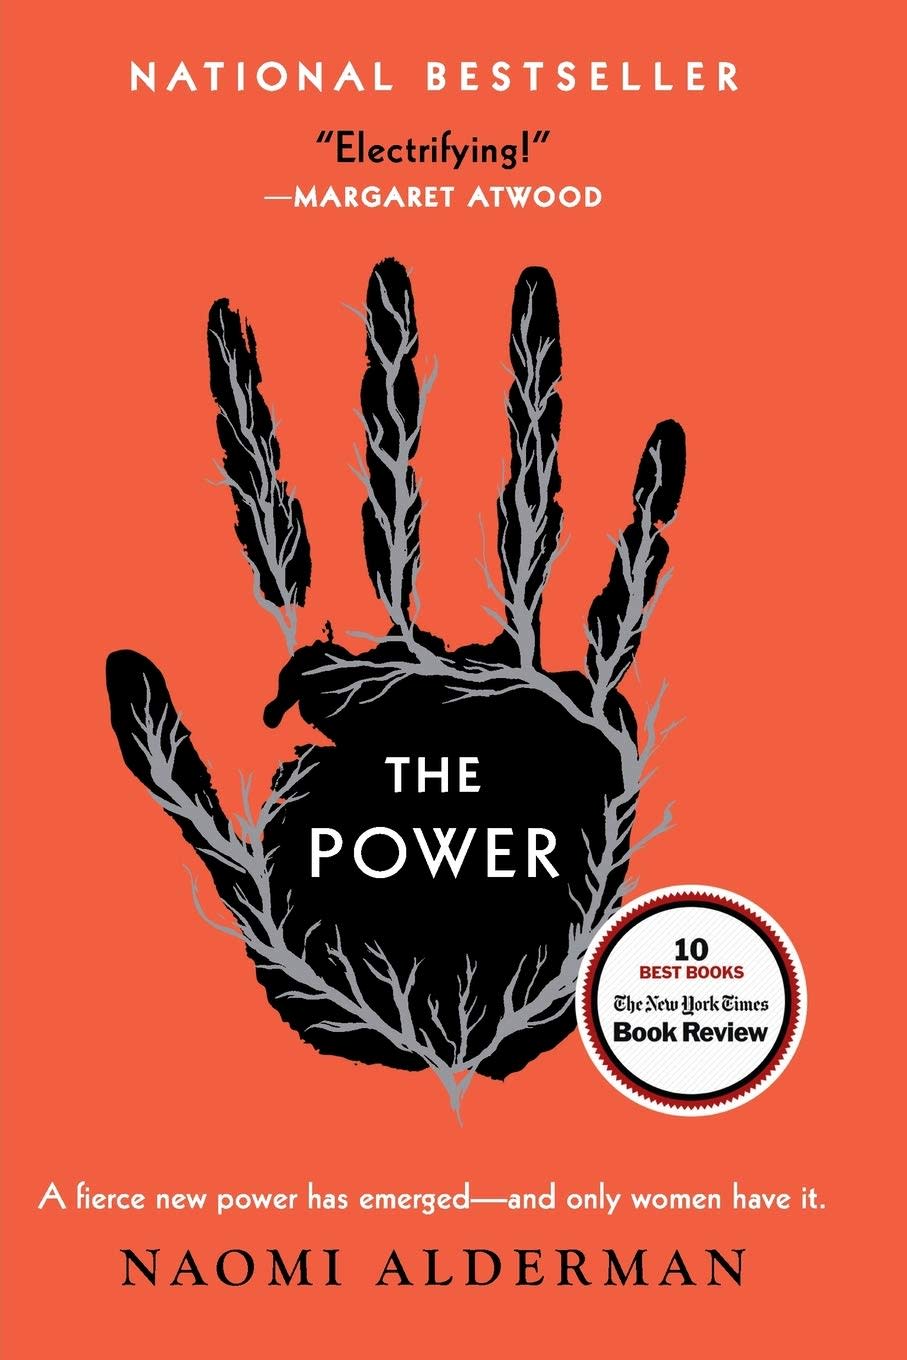 <p><strong>Series: The Power (TBD)</strong></p> <p>Naomi Alderman's dystopian science fiction novel, which was published in 2016, explores ideas of power, responsibility, and potential. It's headed to Amazon Prime with ten episodes starring Auli'I Cravalho and John Leguizamo.</p>